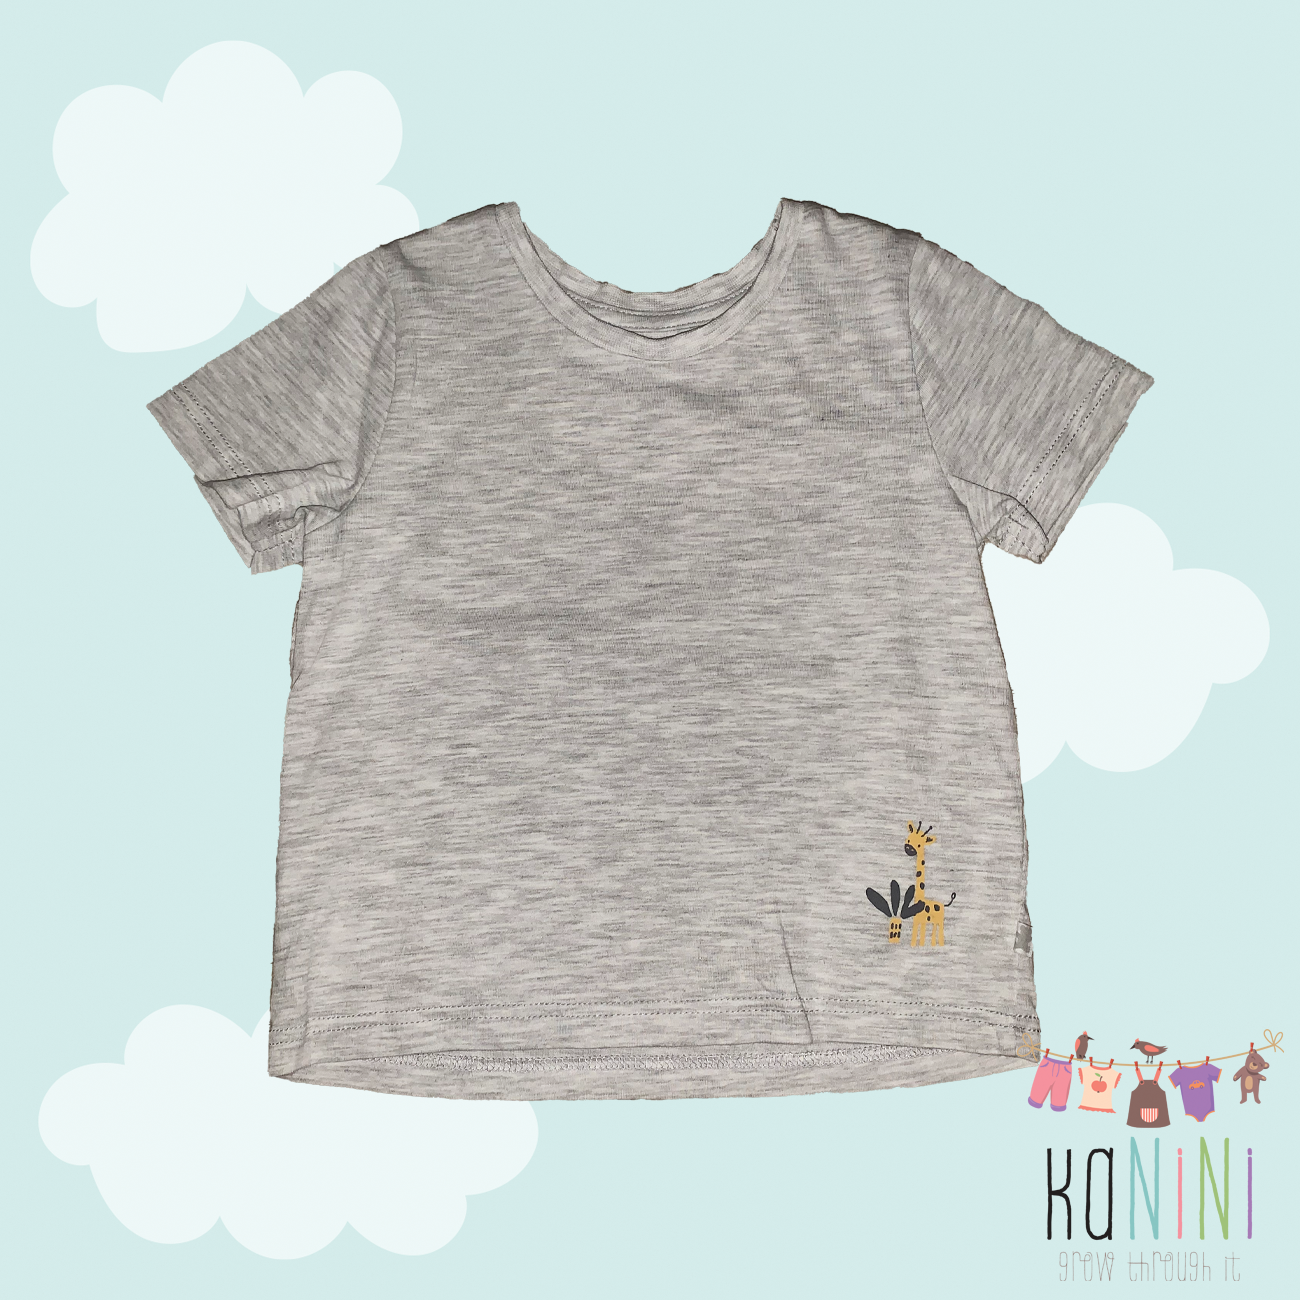 Featured image for “Woolworths 6 - 12 Months Boys Grey T-Shirt”